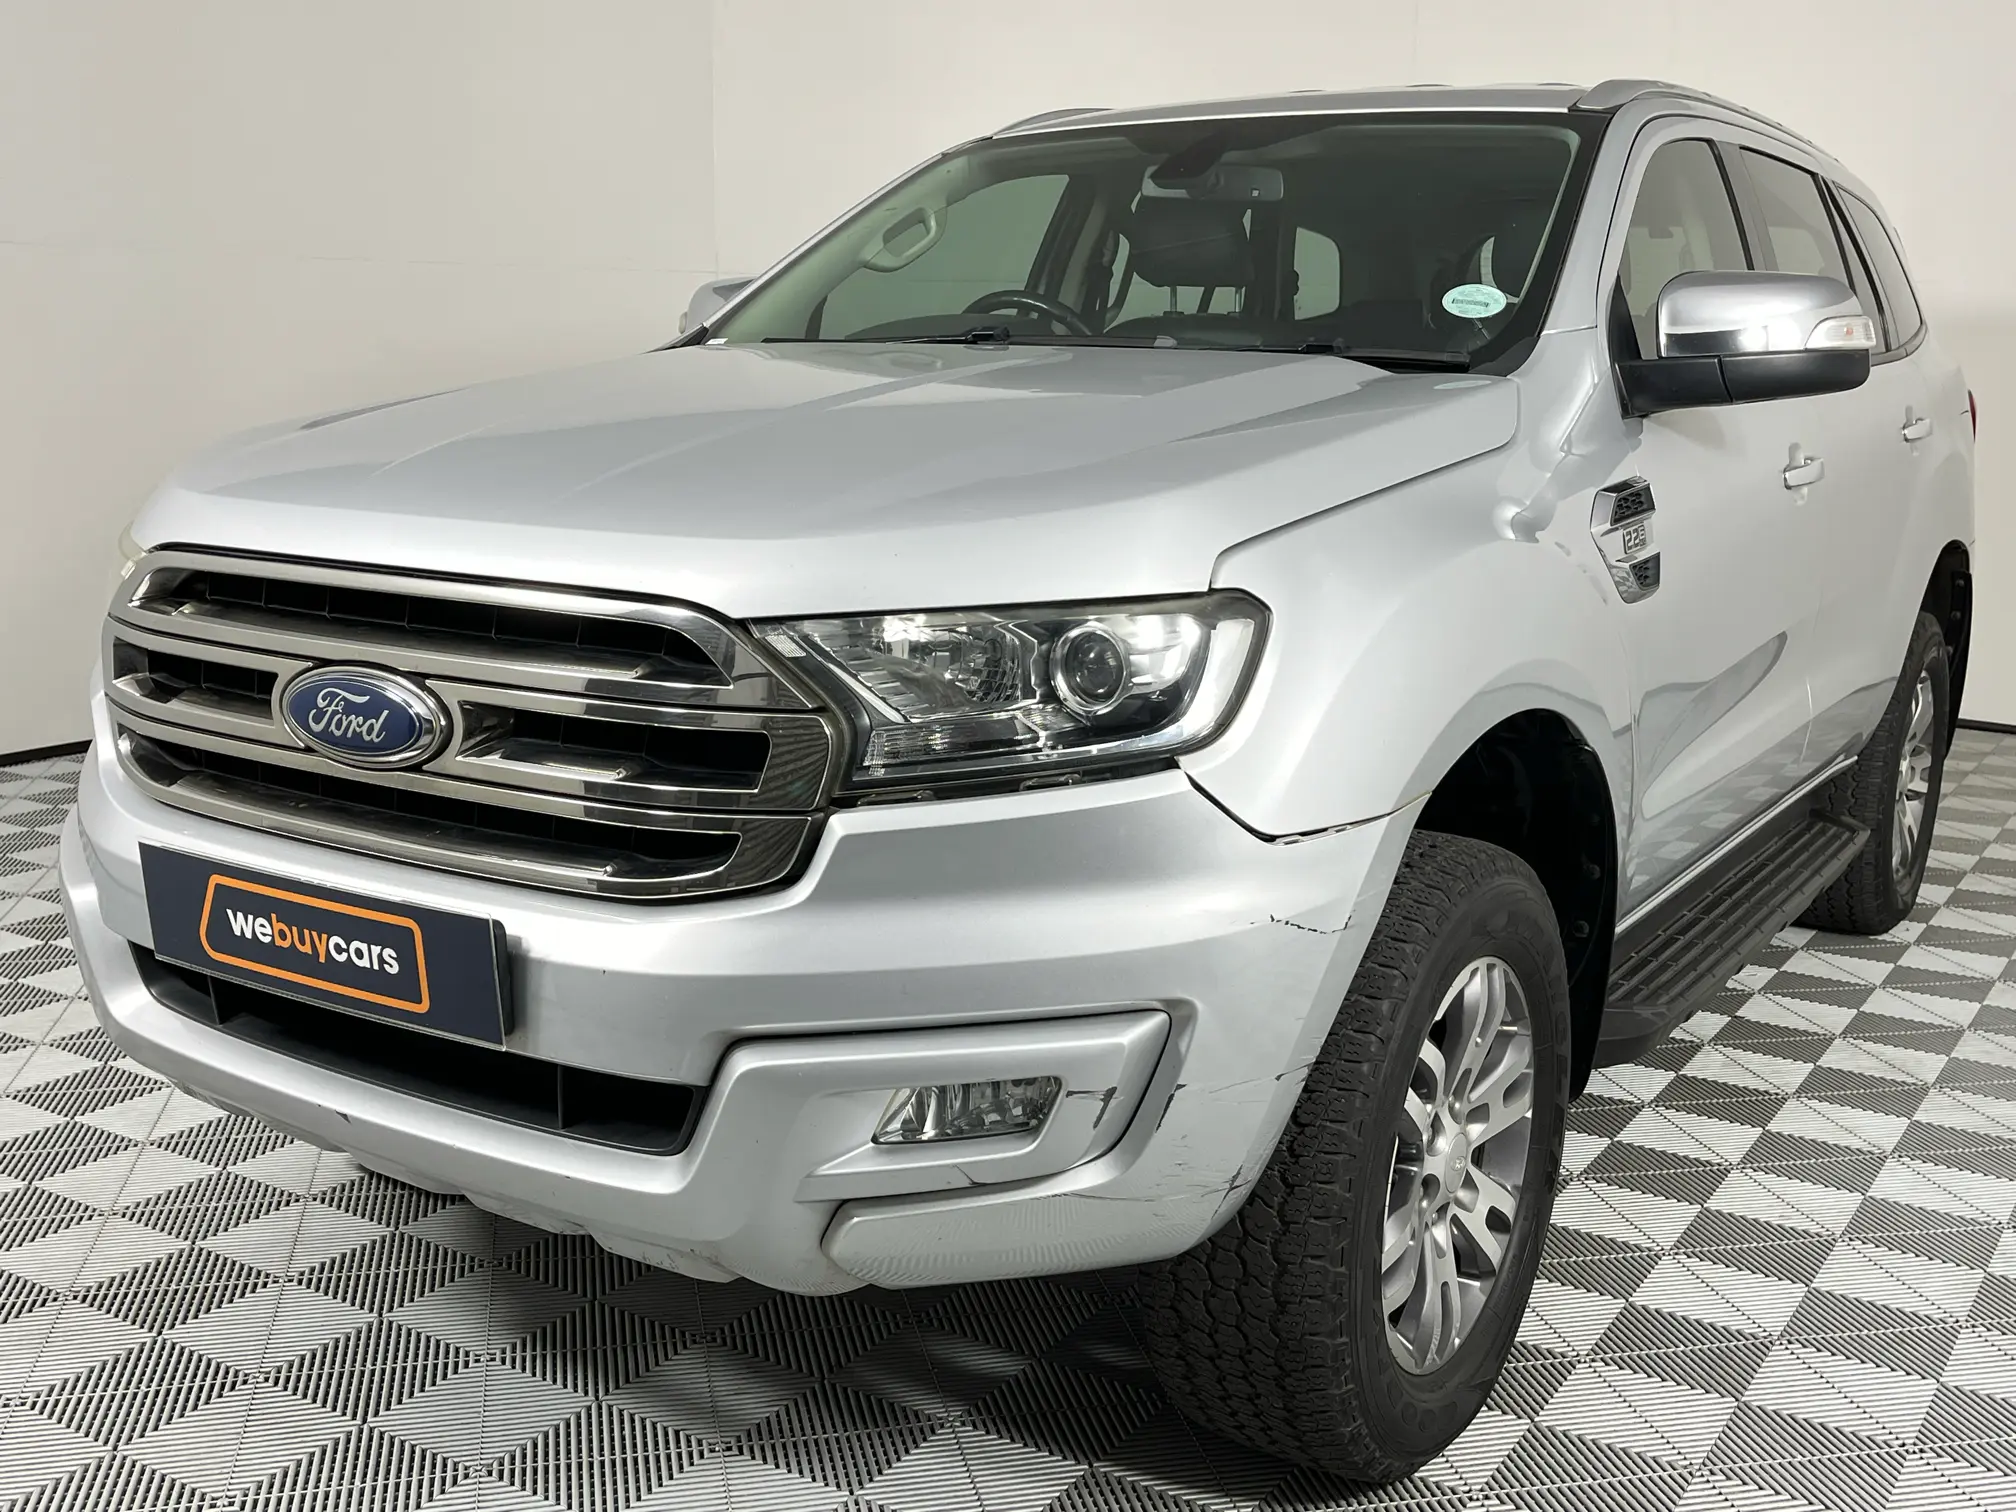 2017 Ford Everest 2.2 TDCi XLT Auto